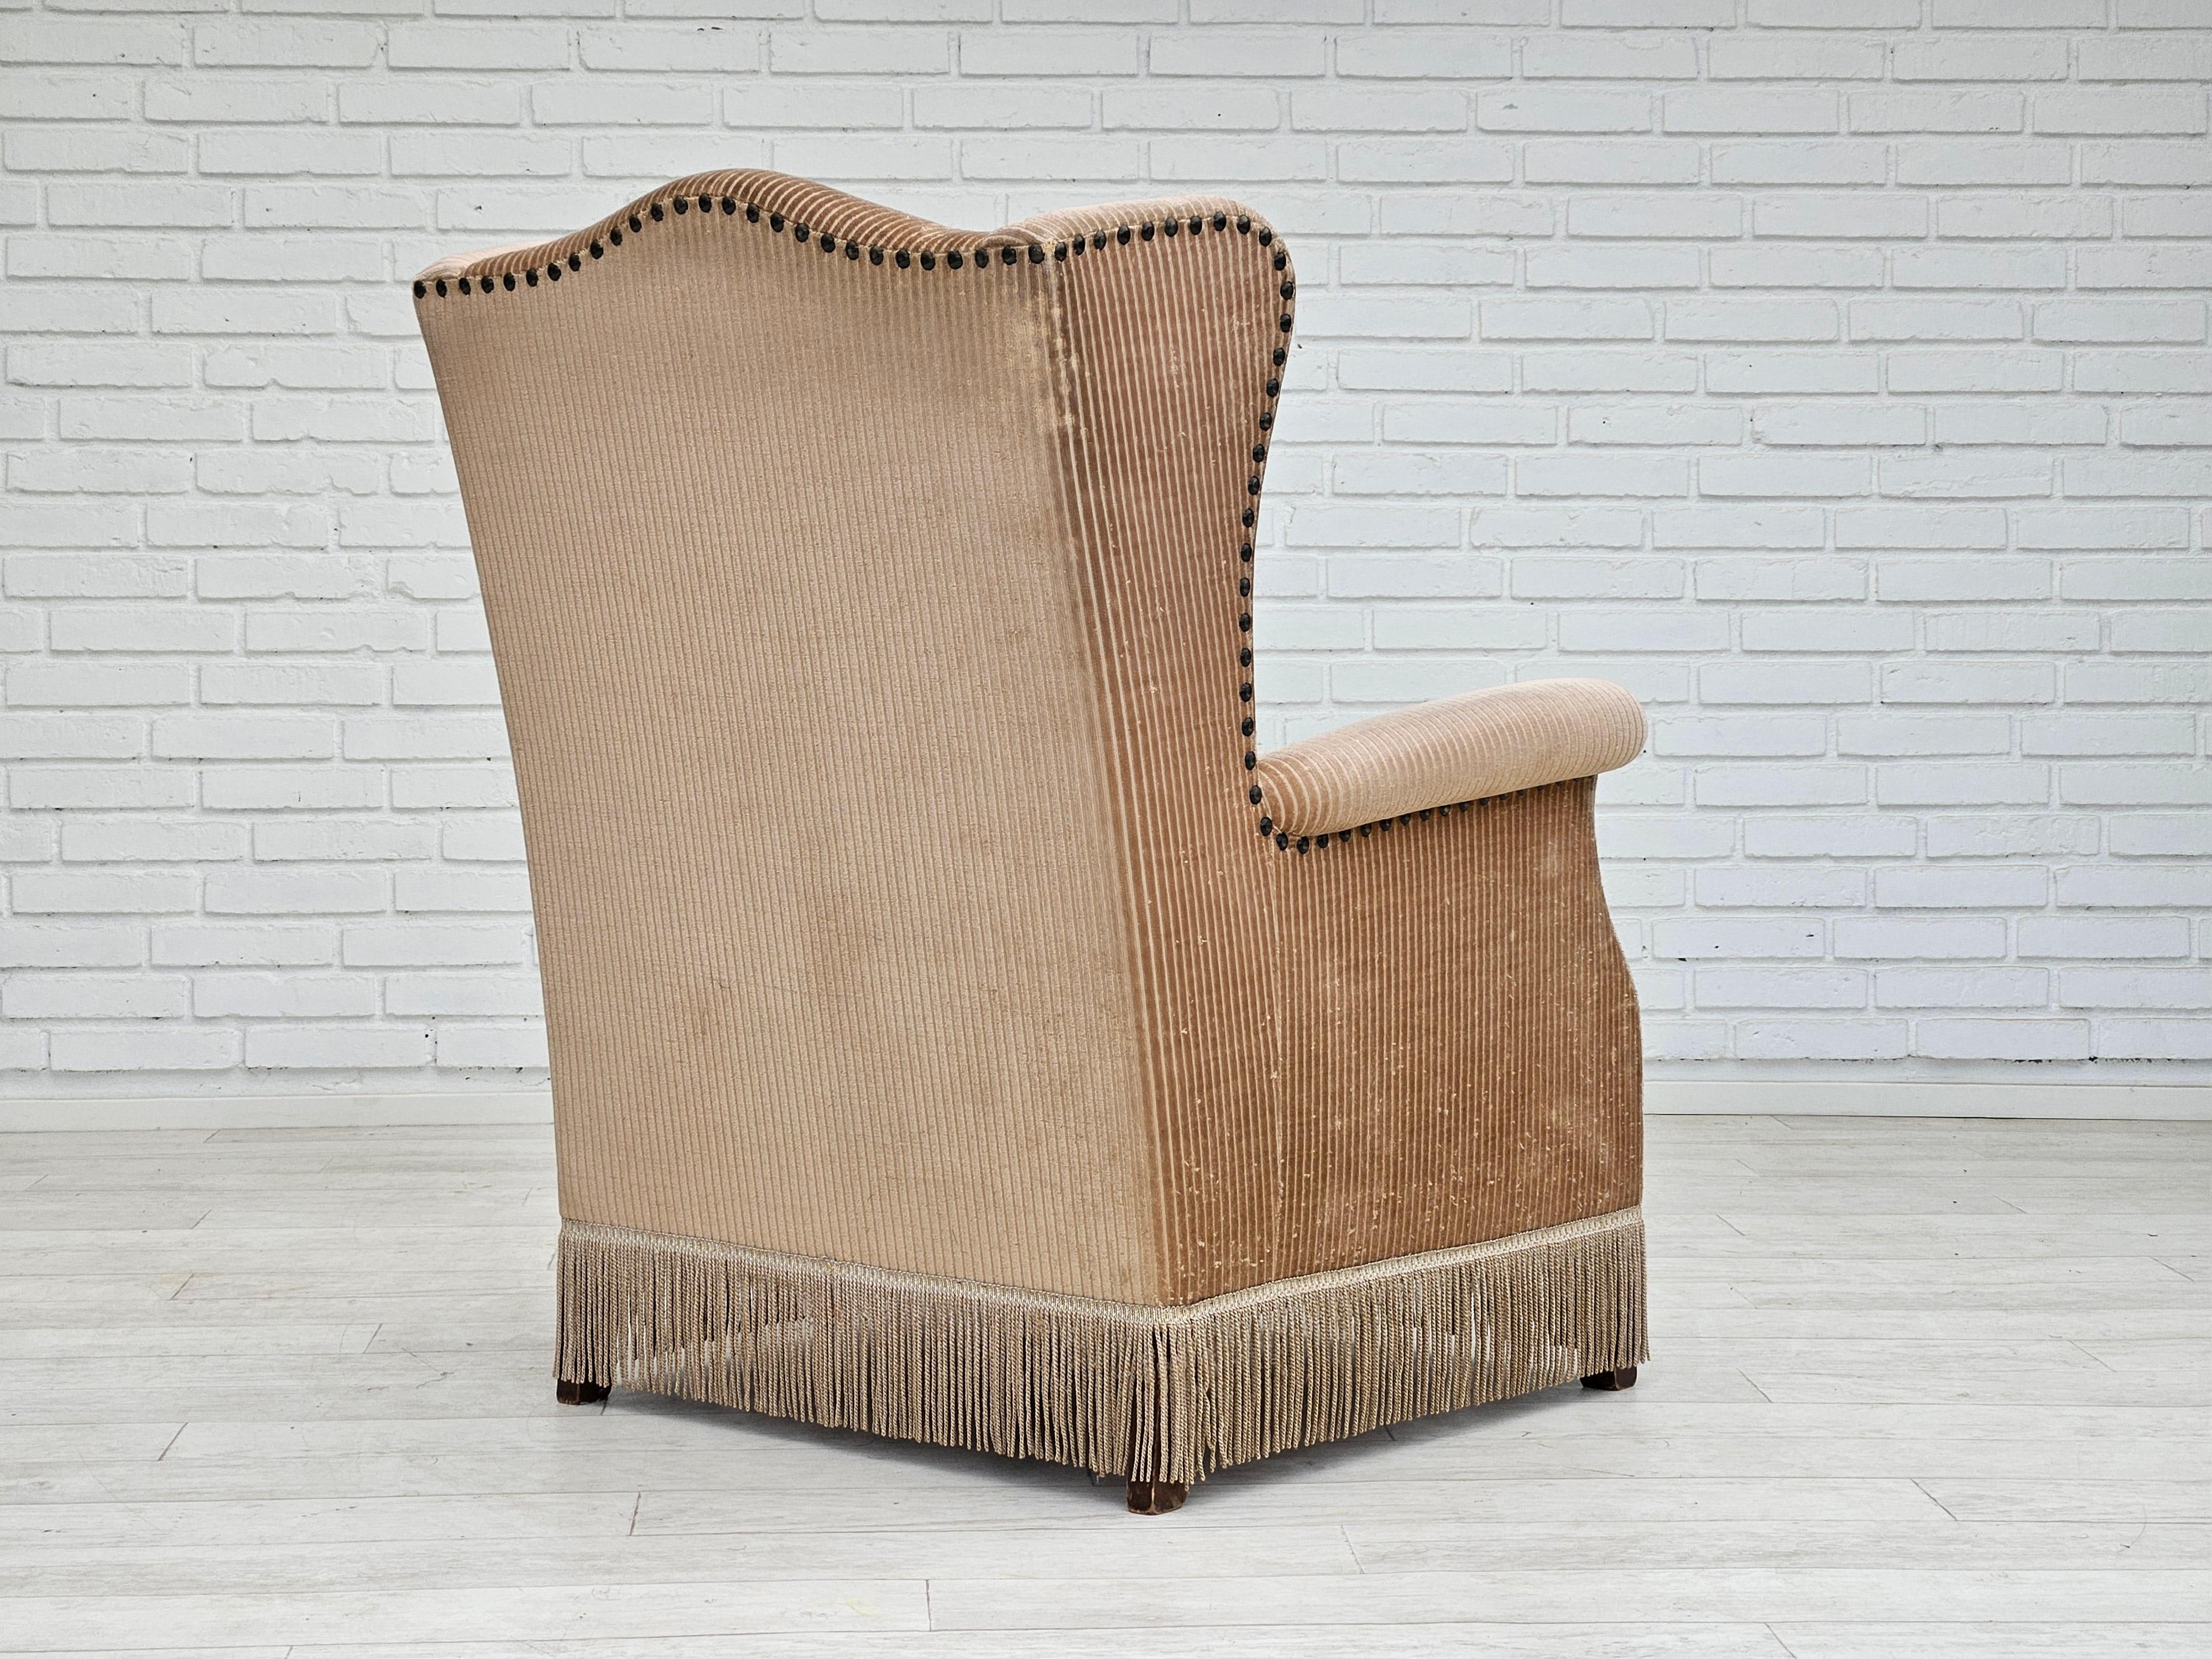 Late 20th Century 1970s, Danish design, armchair in corduroy, ash wood, original condition. For Sale